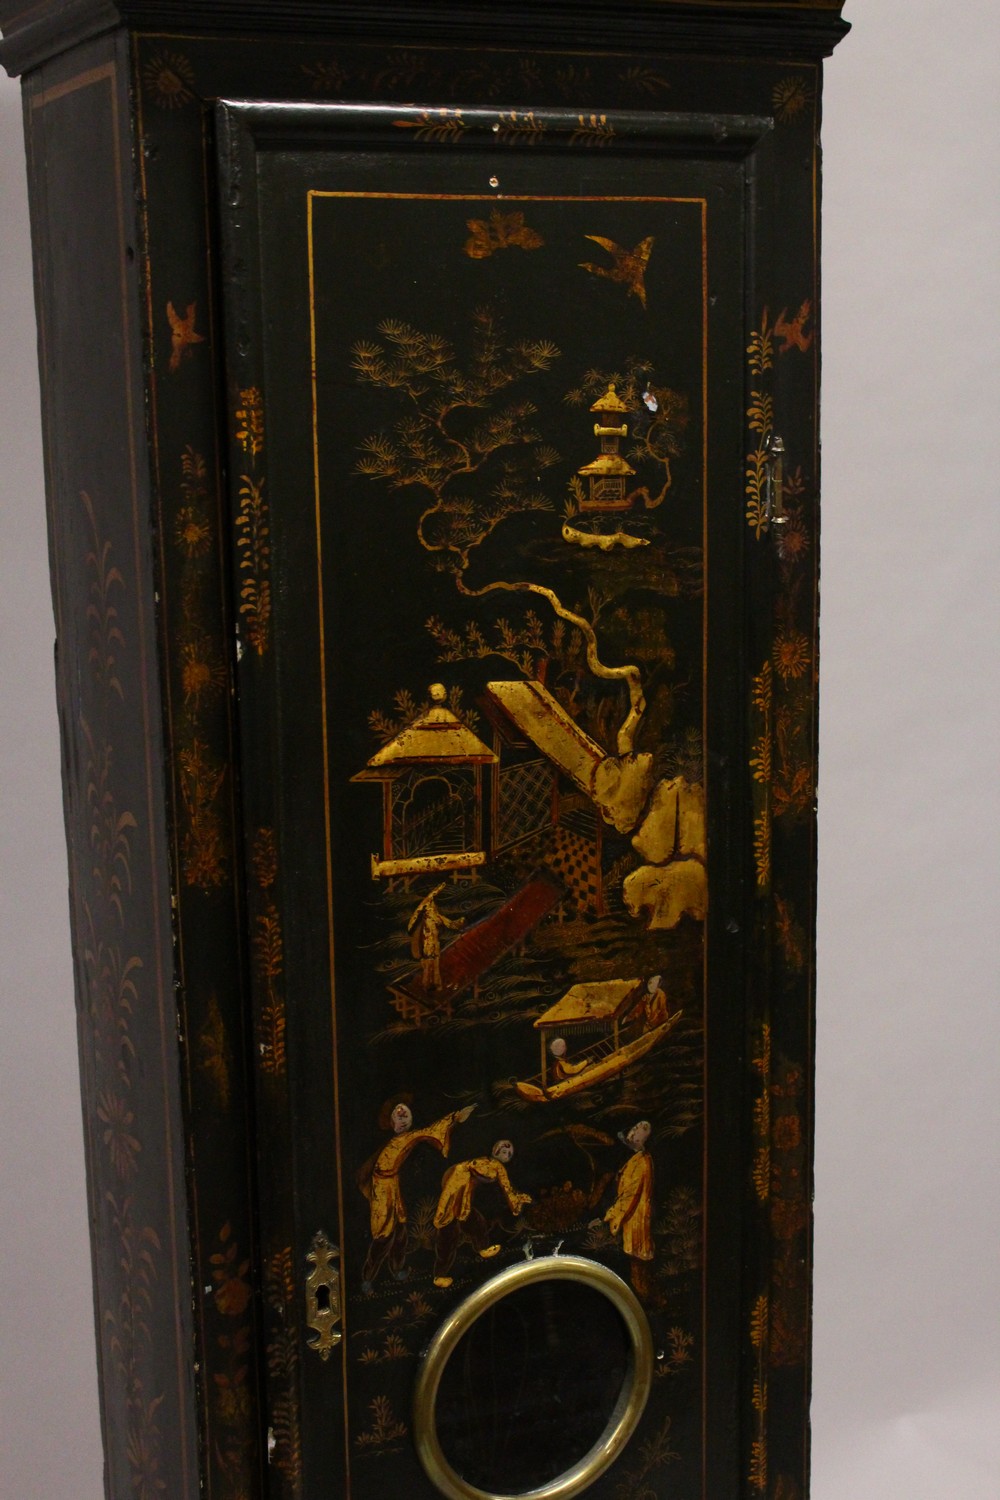 A GEORGE III CHINOISERIE DECORATED BLACK LACQUER LONGCASE CLOCK, by William Kipling, London, with - Image 7 of 26